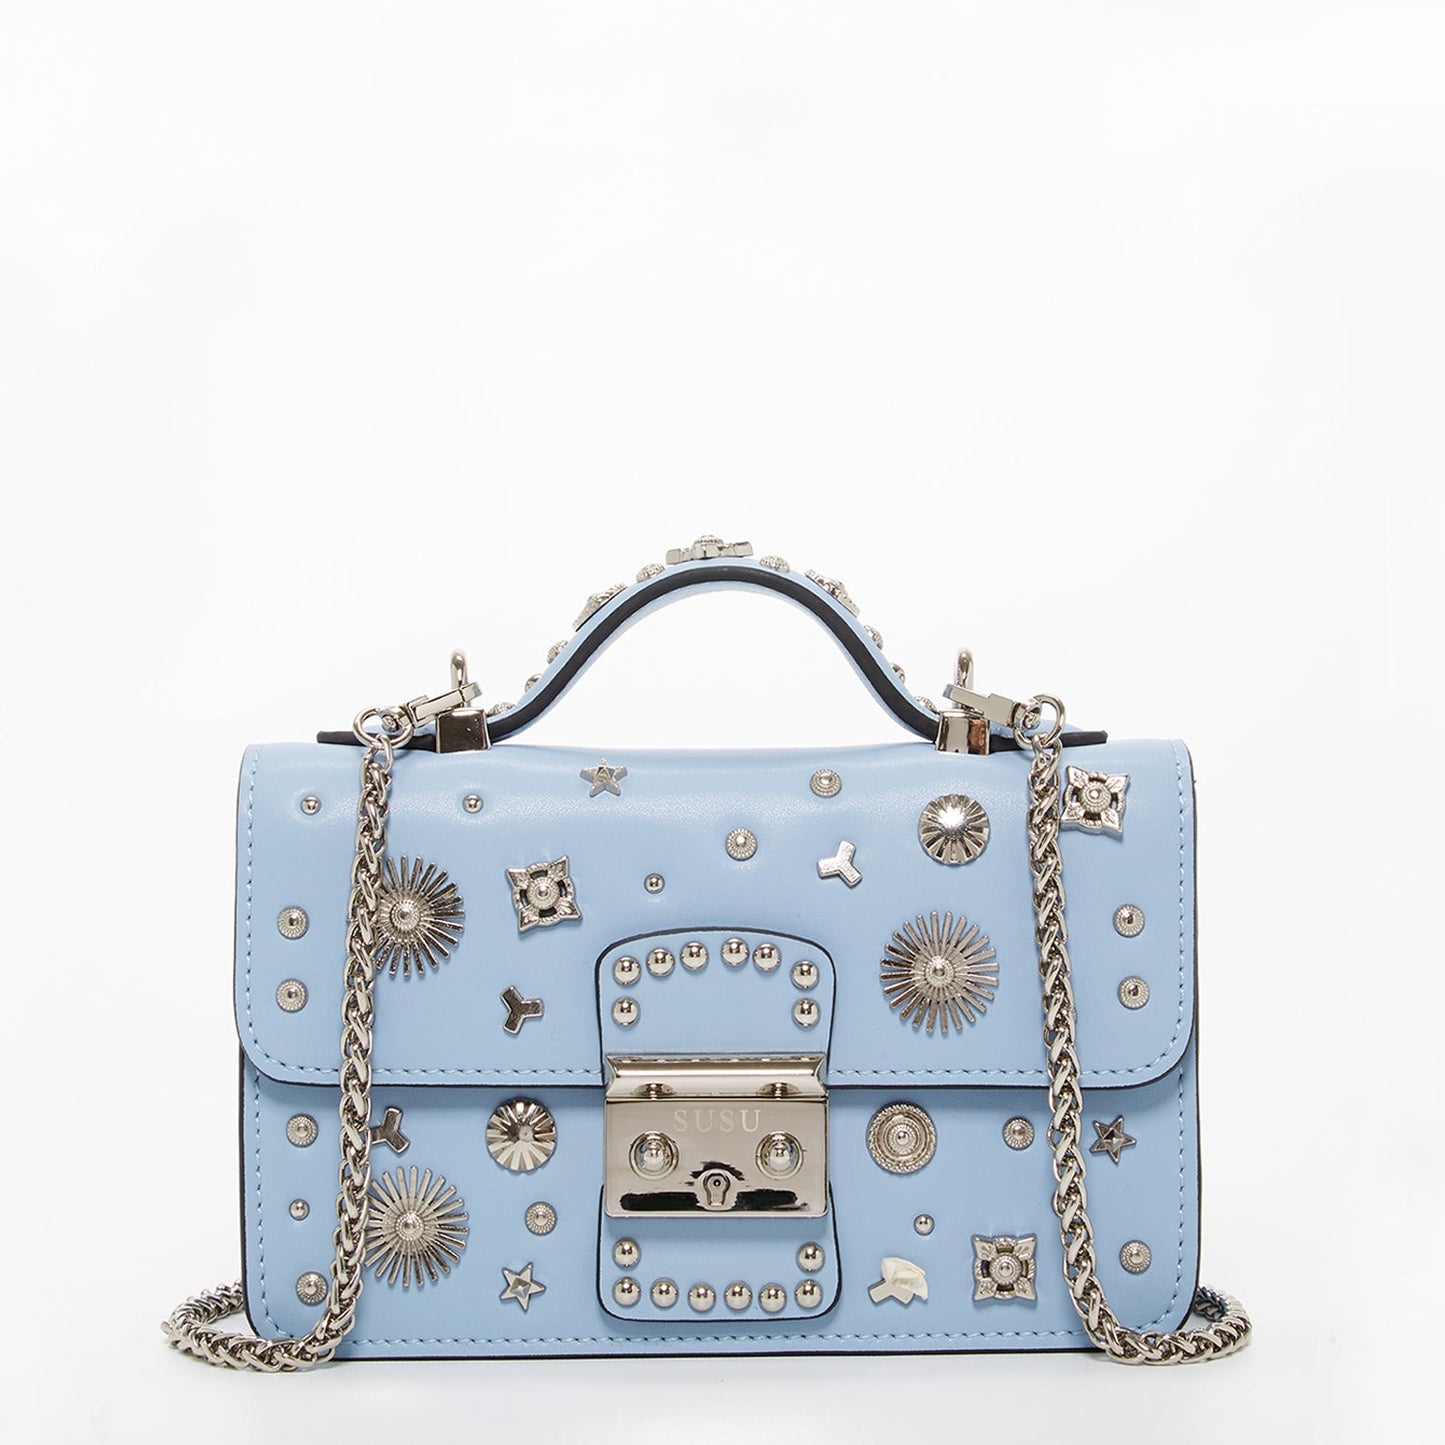 The Hollywood Studded Leather Leather Crossbody in Light Blue